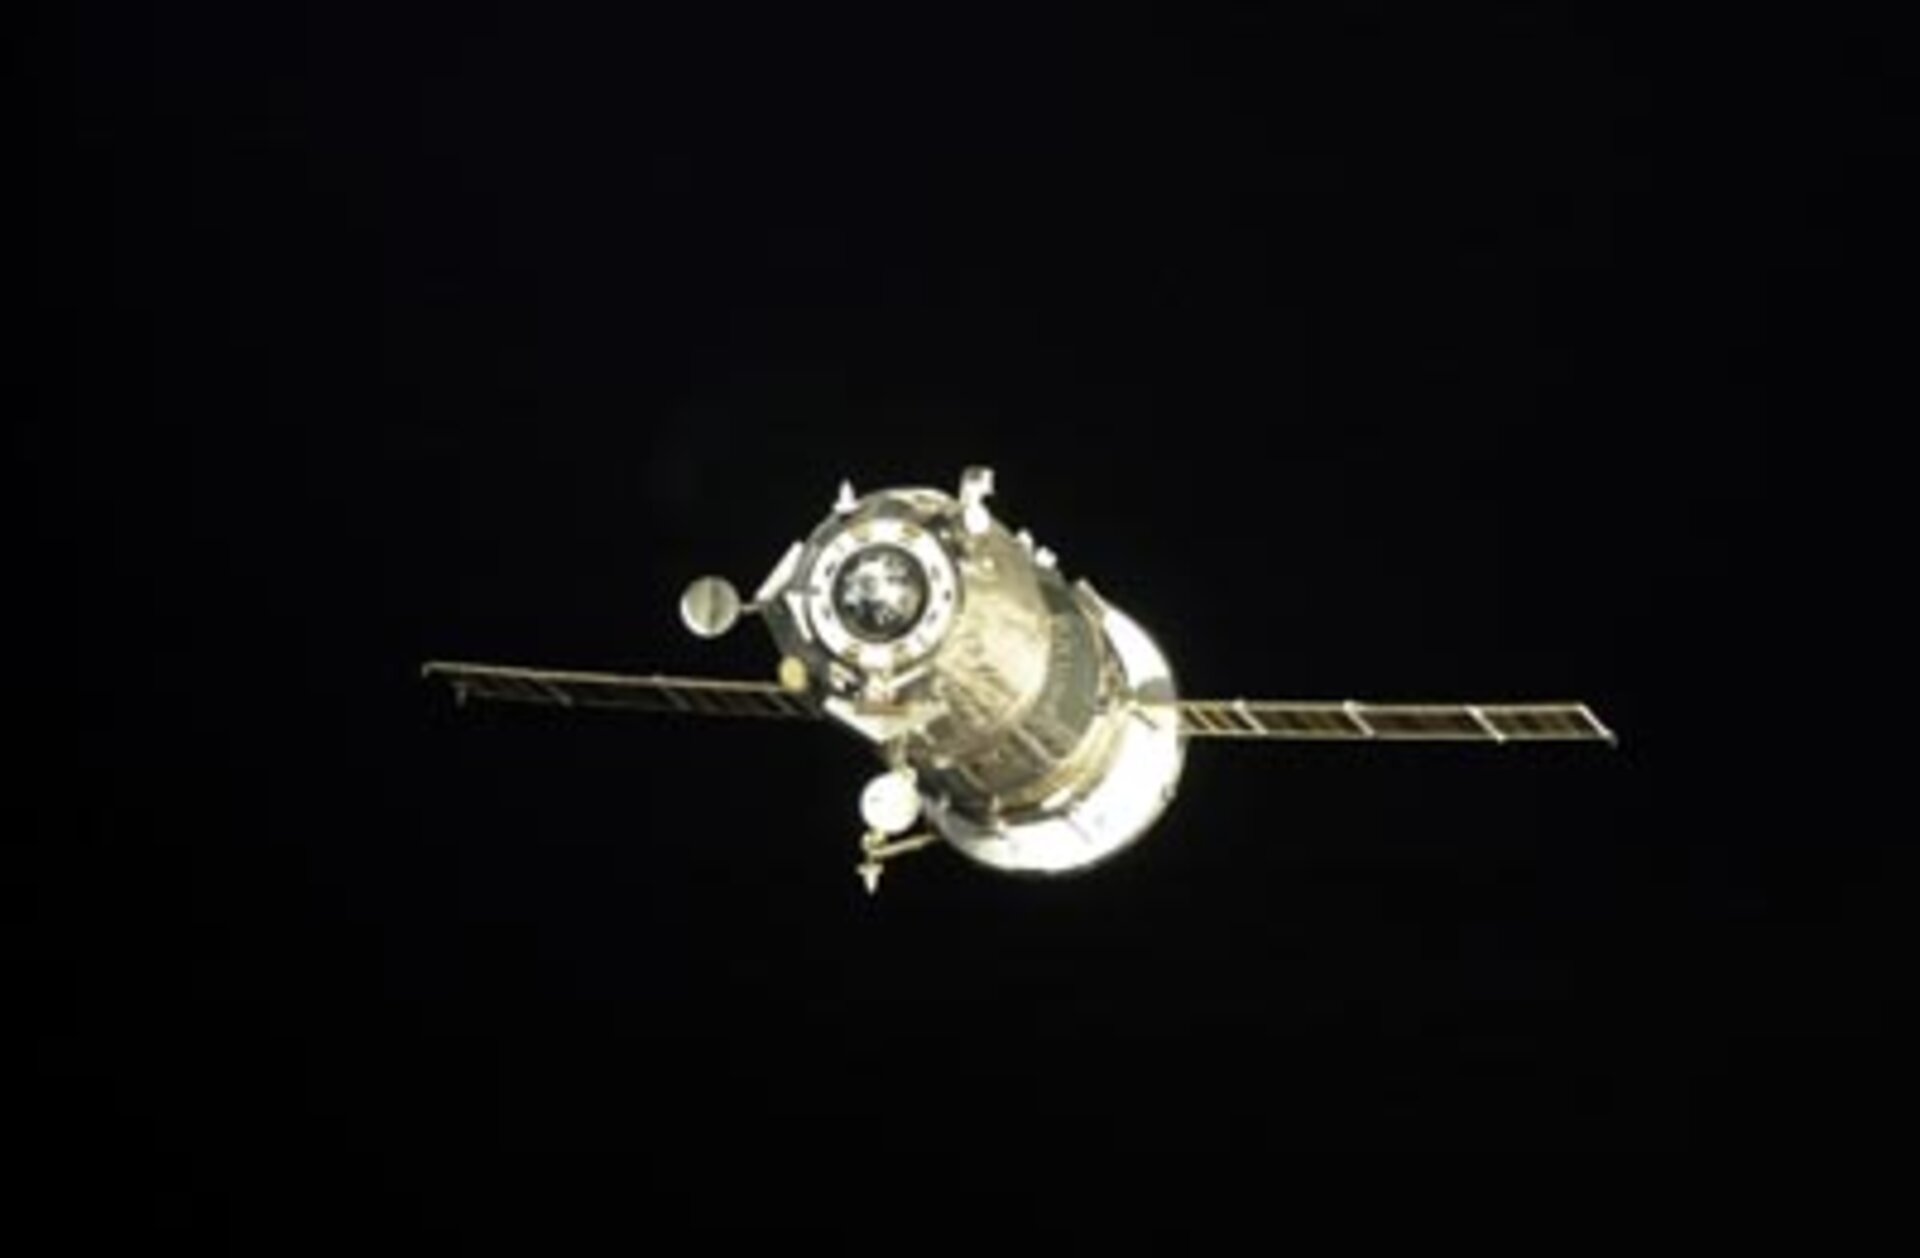 Successful docking of an unmanned Progress spacecraft with the ISS on 31 August